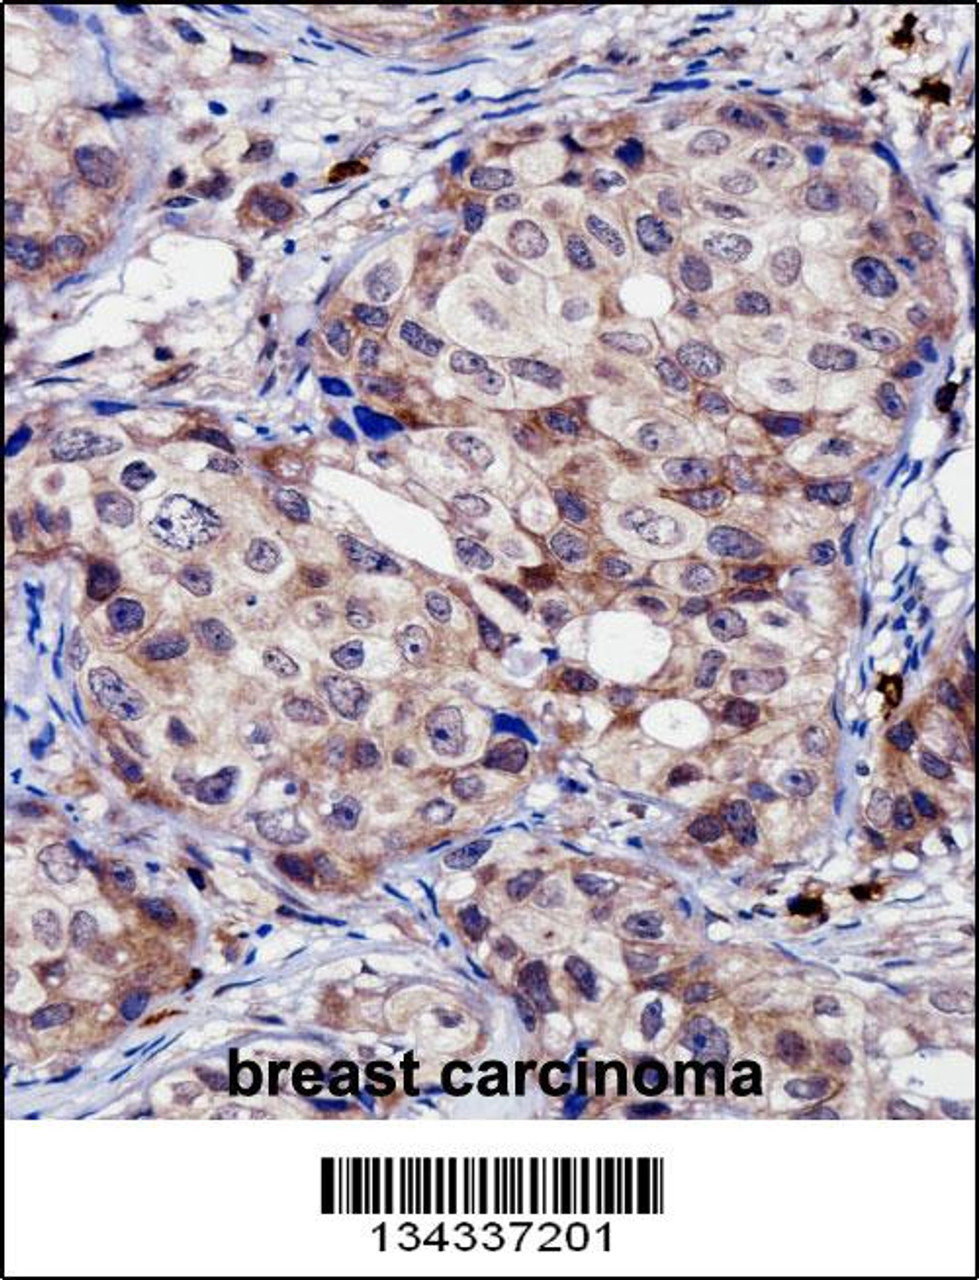 RNF144A Antibody immunohistochemistry analysis in formalin fixed and paraffin embedded human breast carcinoma followed by peroxidase conjugation of the secondary antibody and DAB staining.